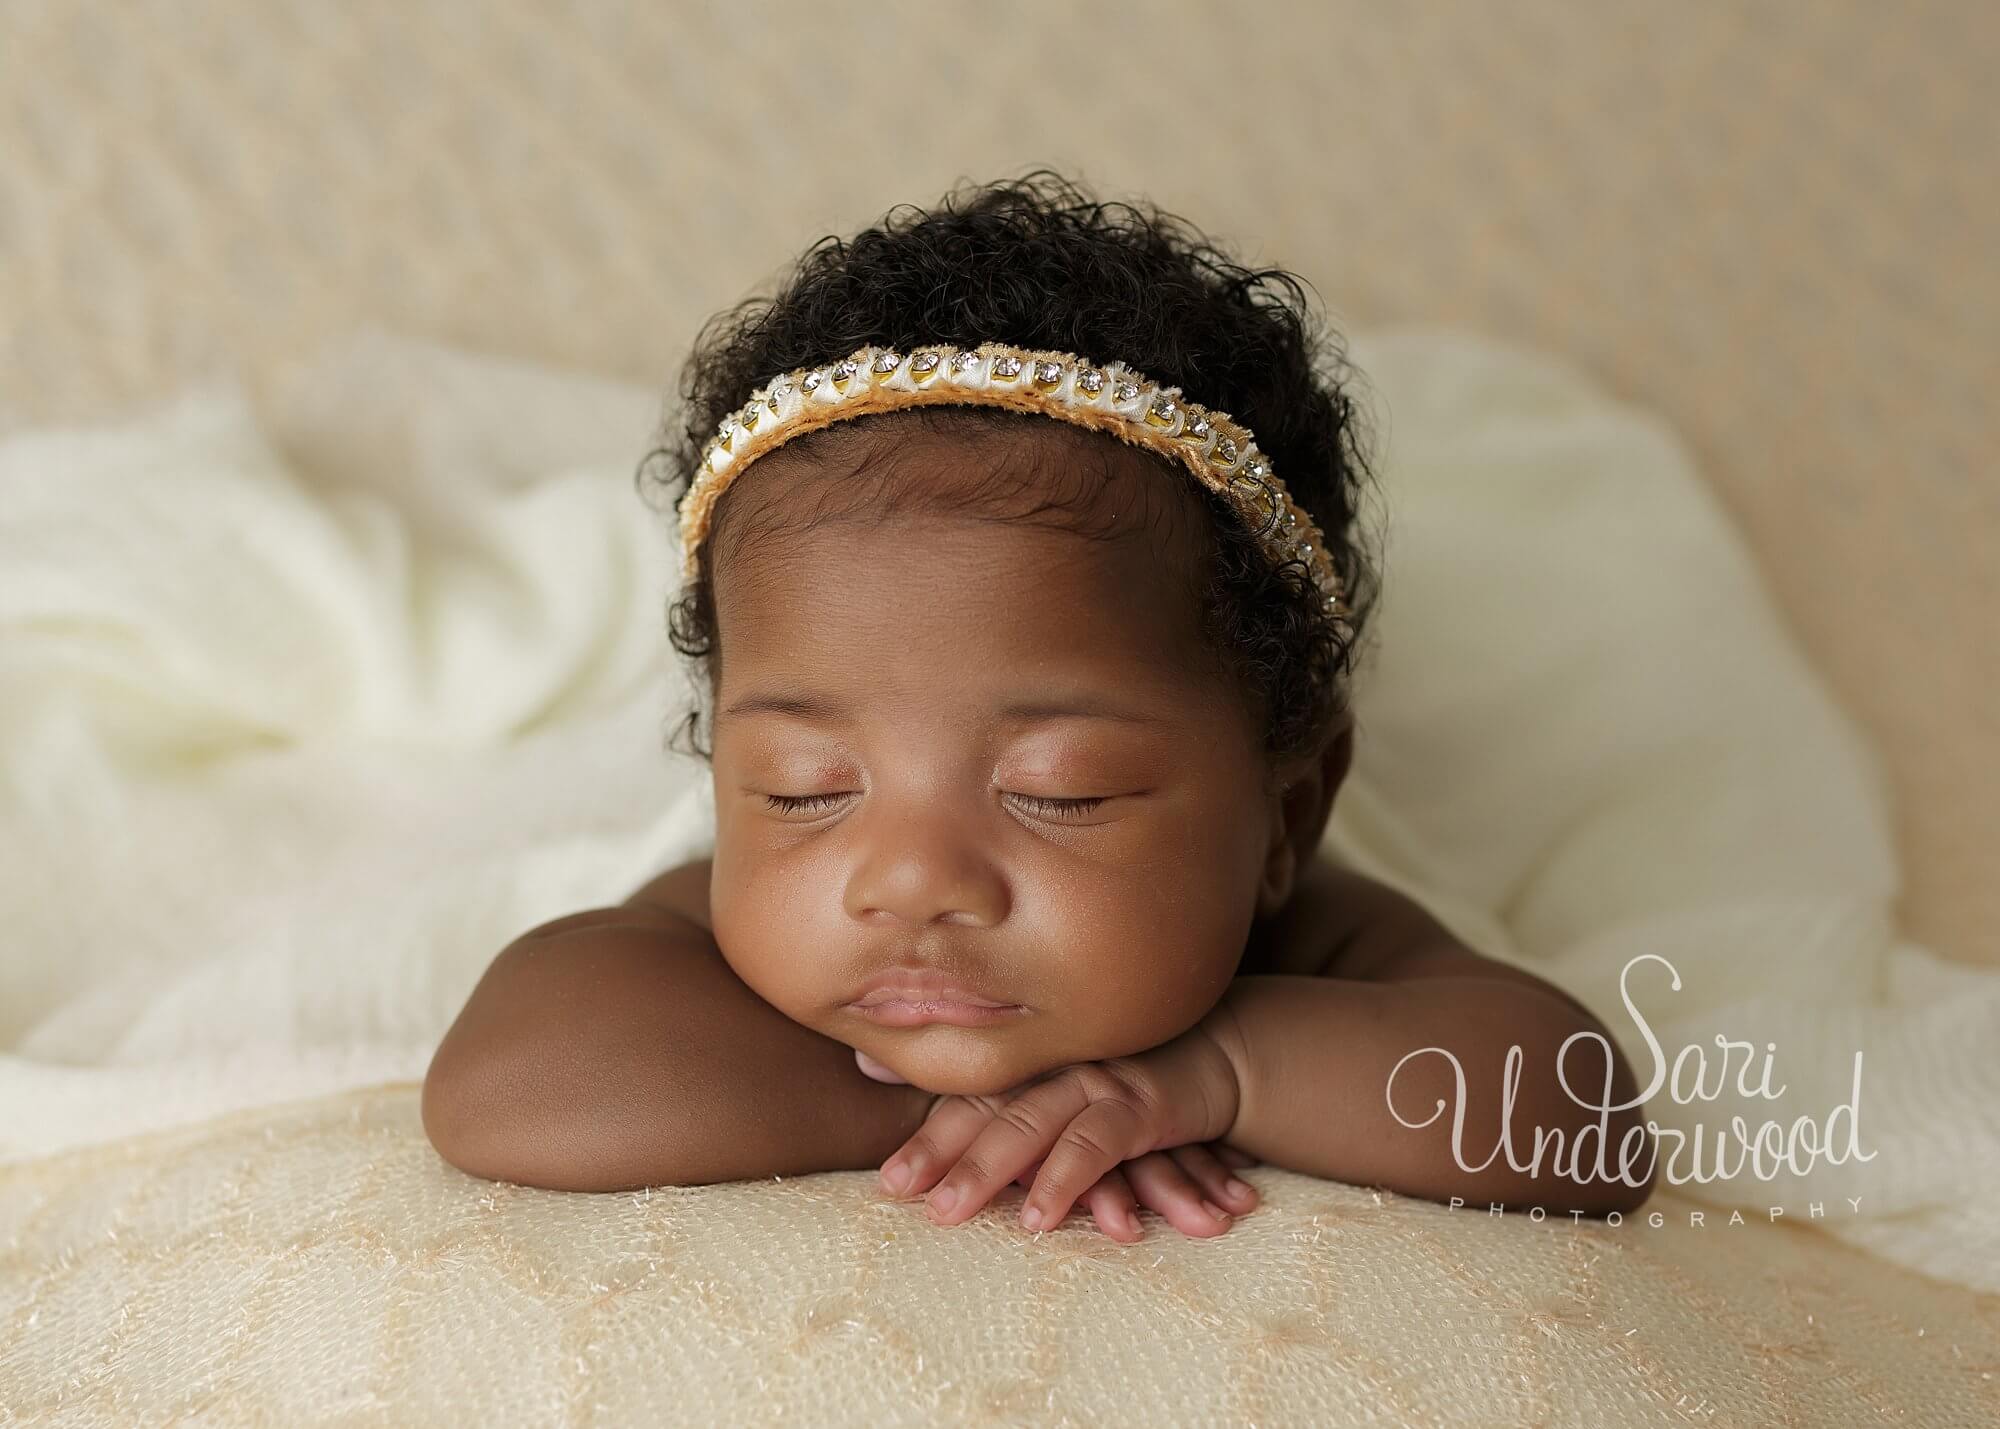 black baby girl with head resting on hands adorned in gold headband